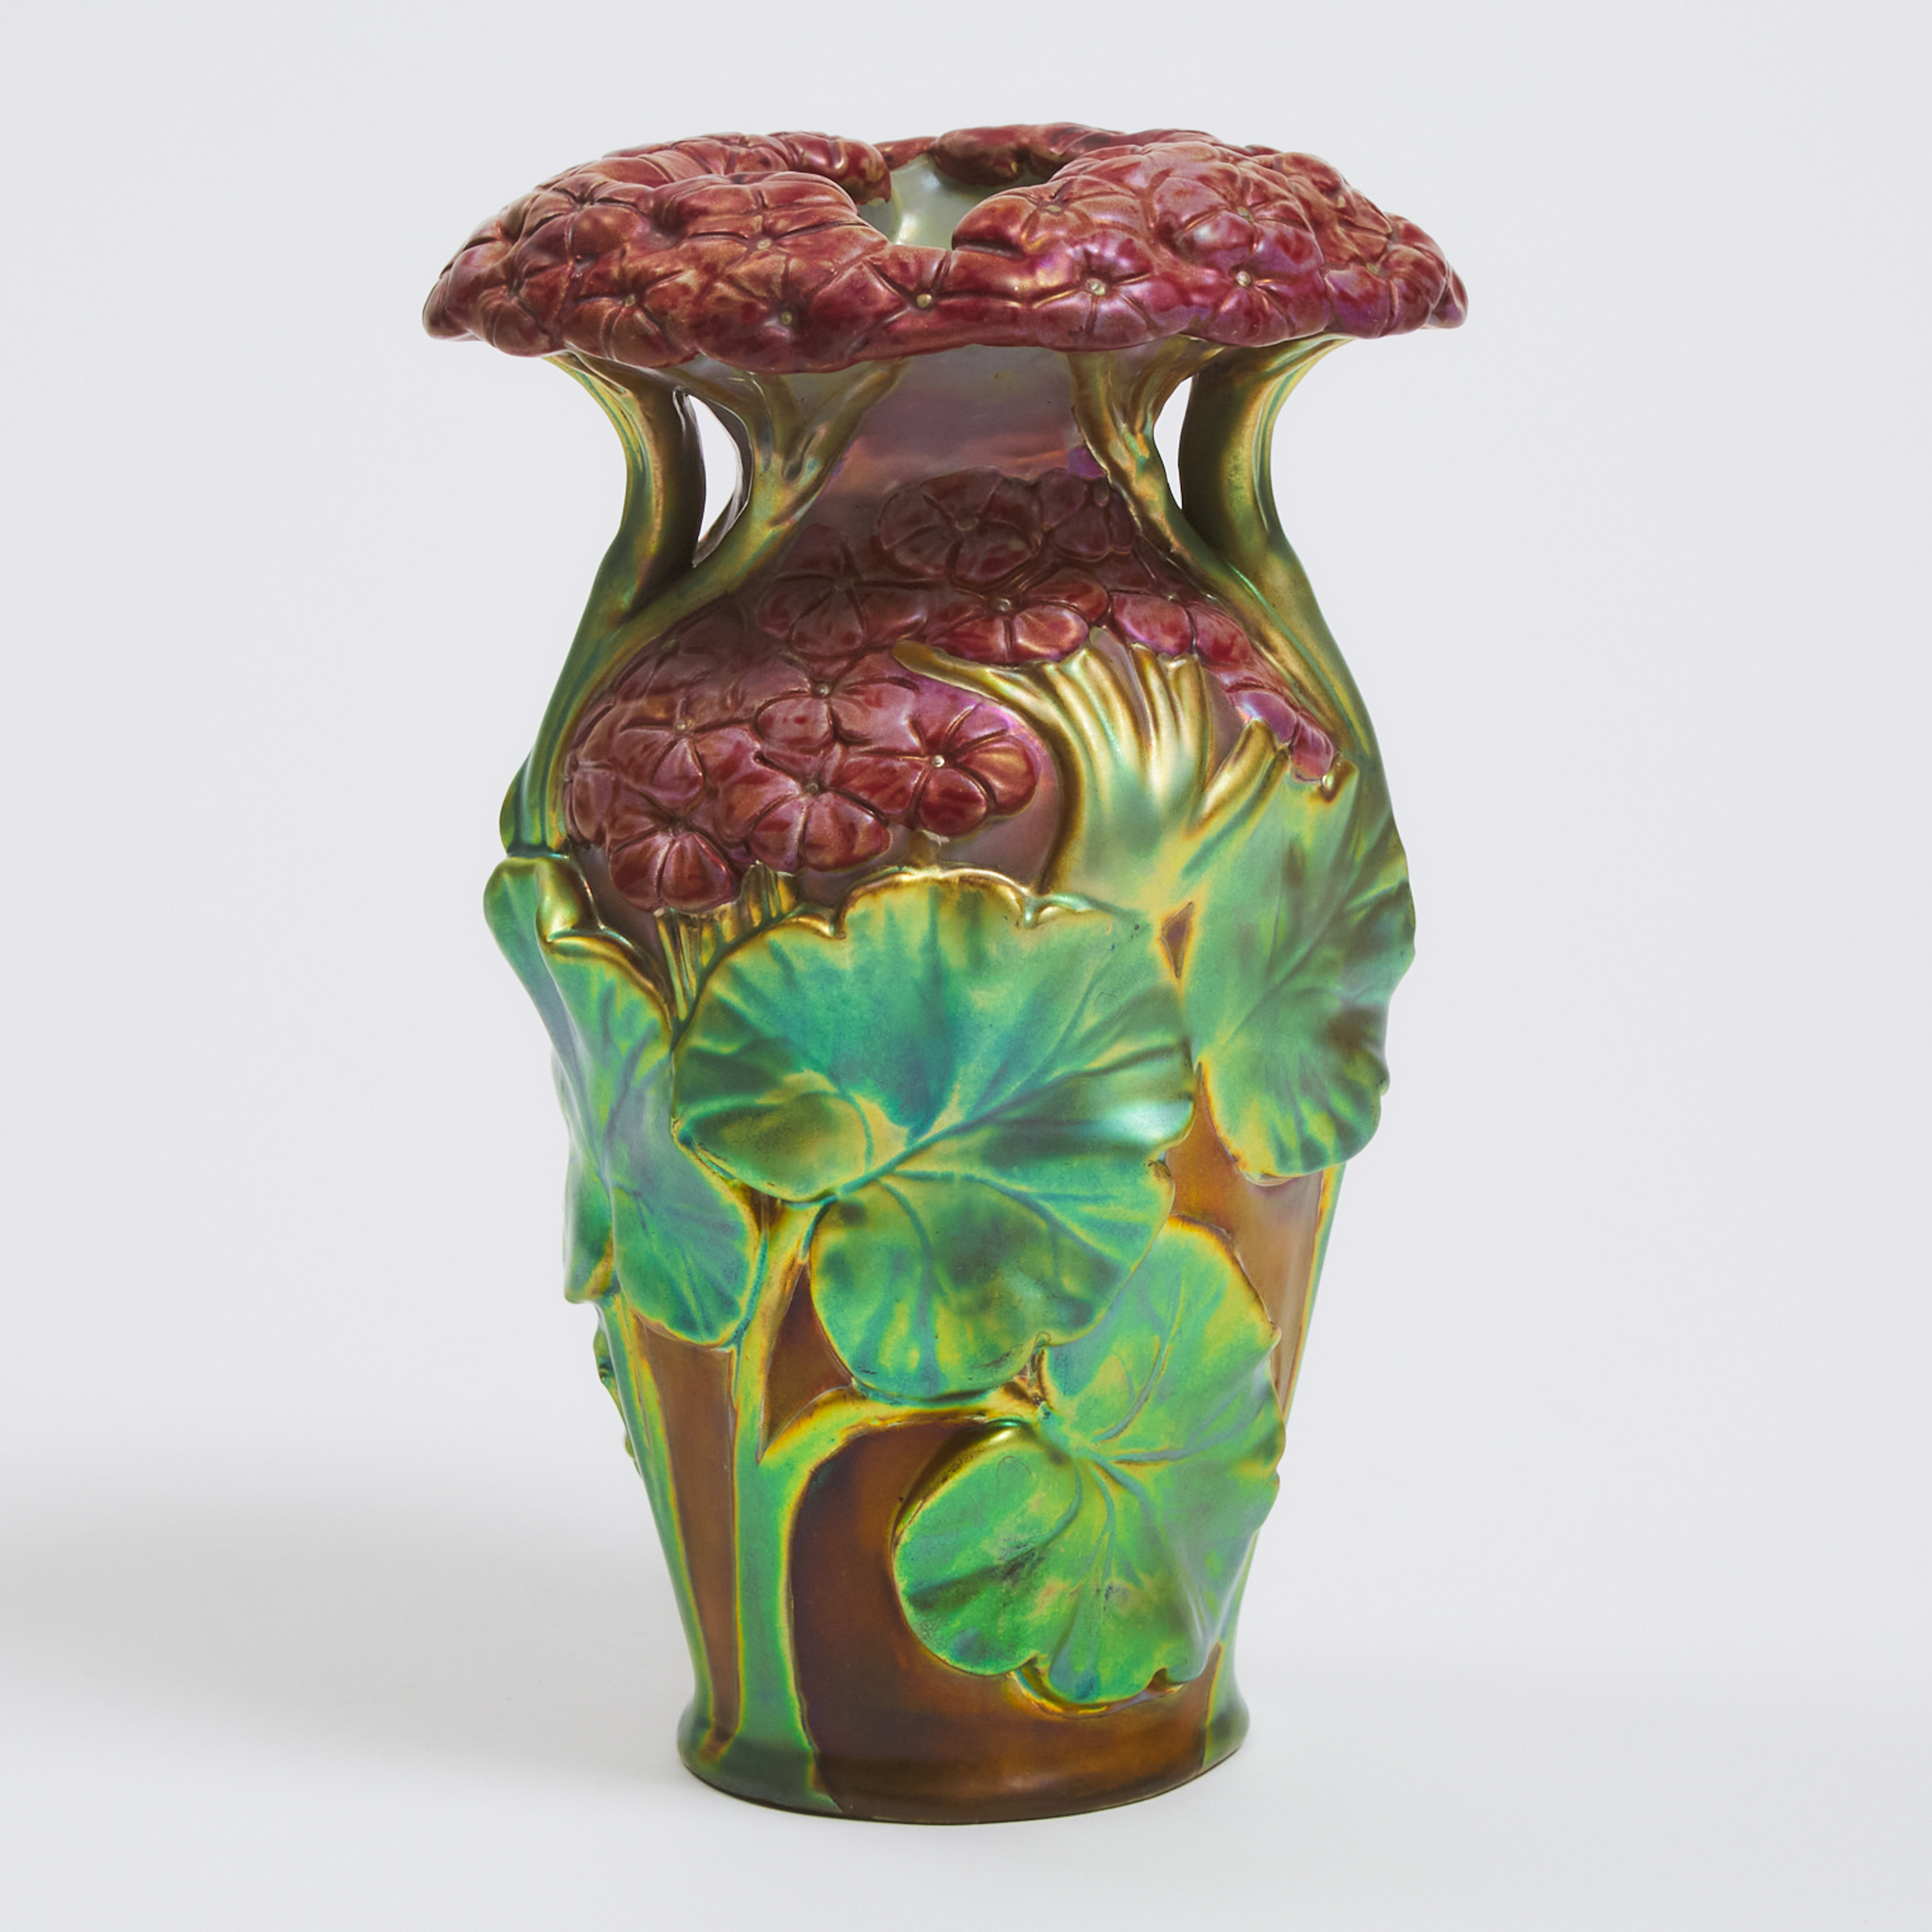 Zsolnay Iridescent Red and Green Glazed